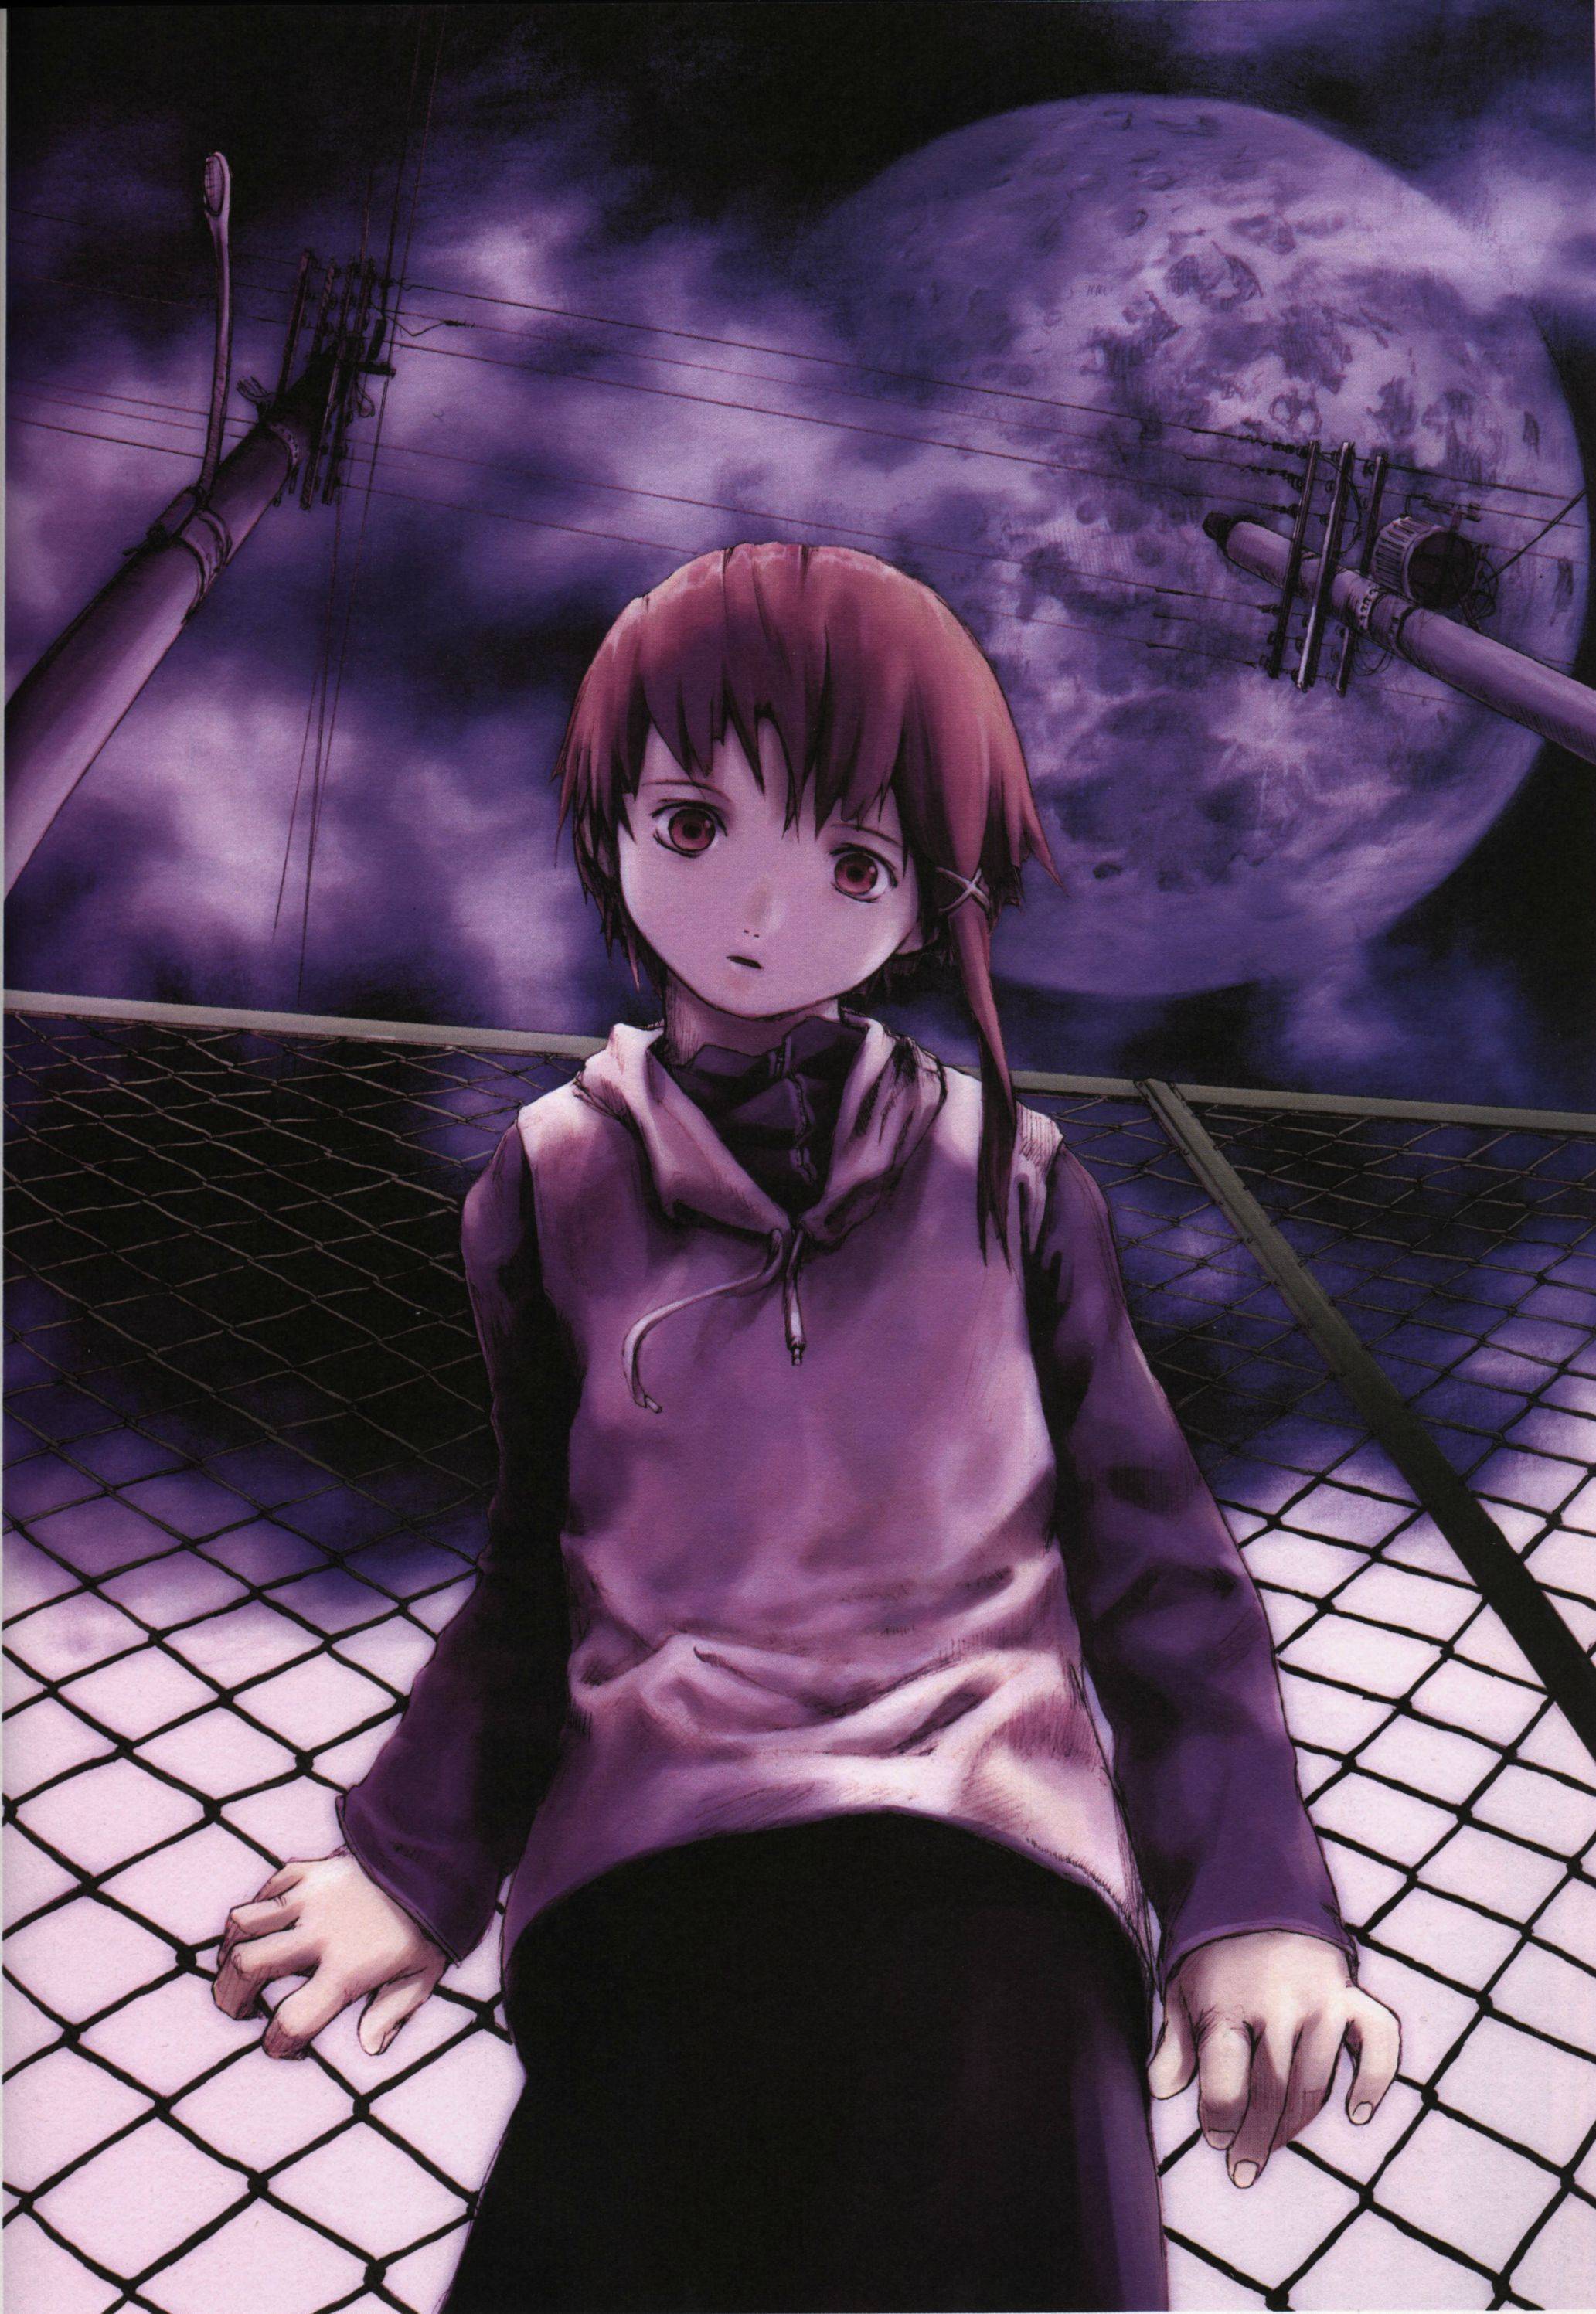 serial experiments lain ep 2